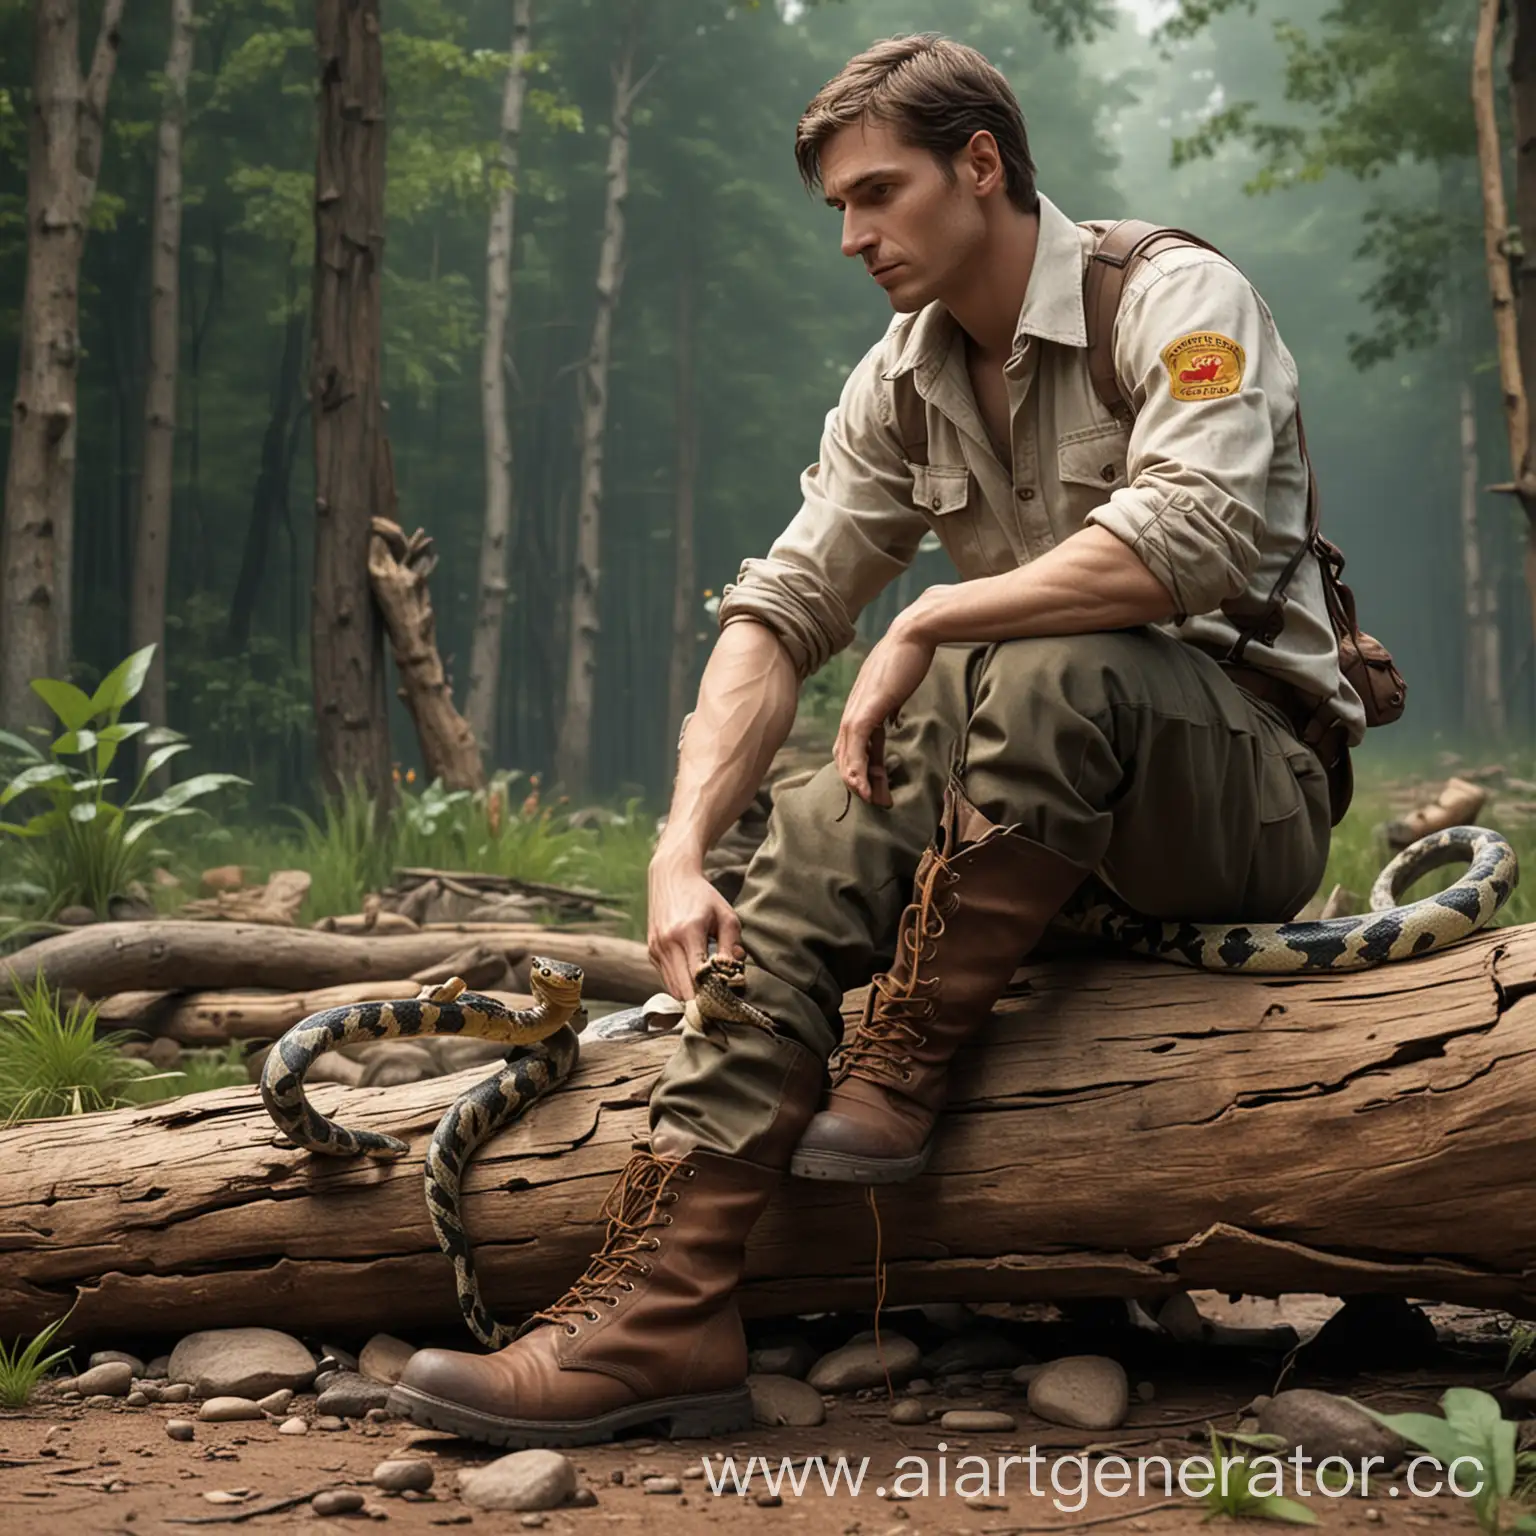 Man-in-Work-Clothes-Sitting-on-Log-with-Aggressive-Snake